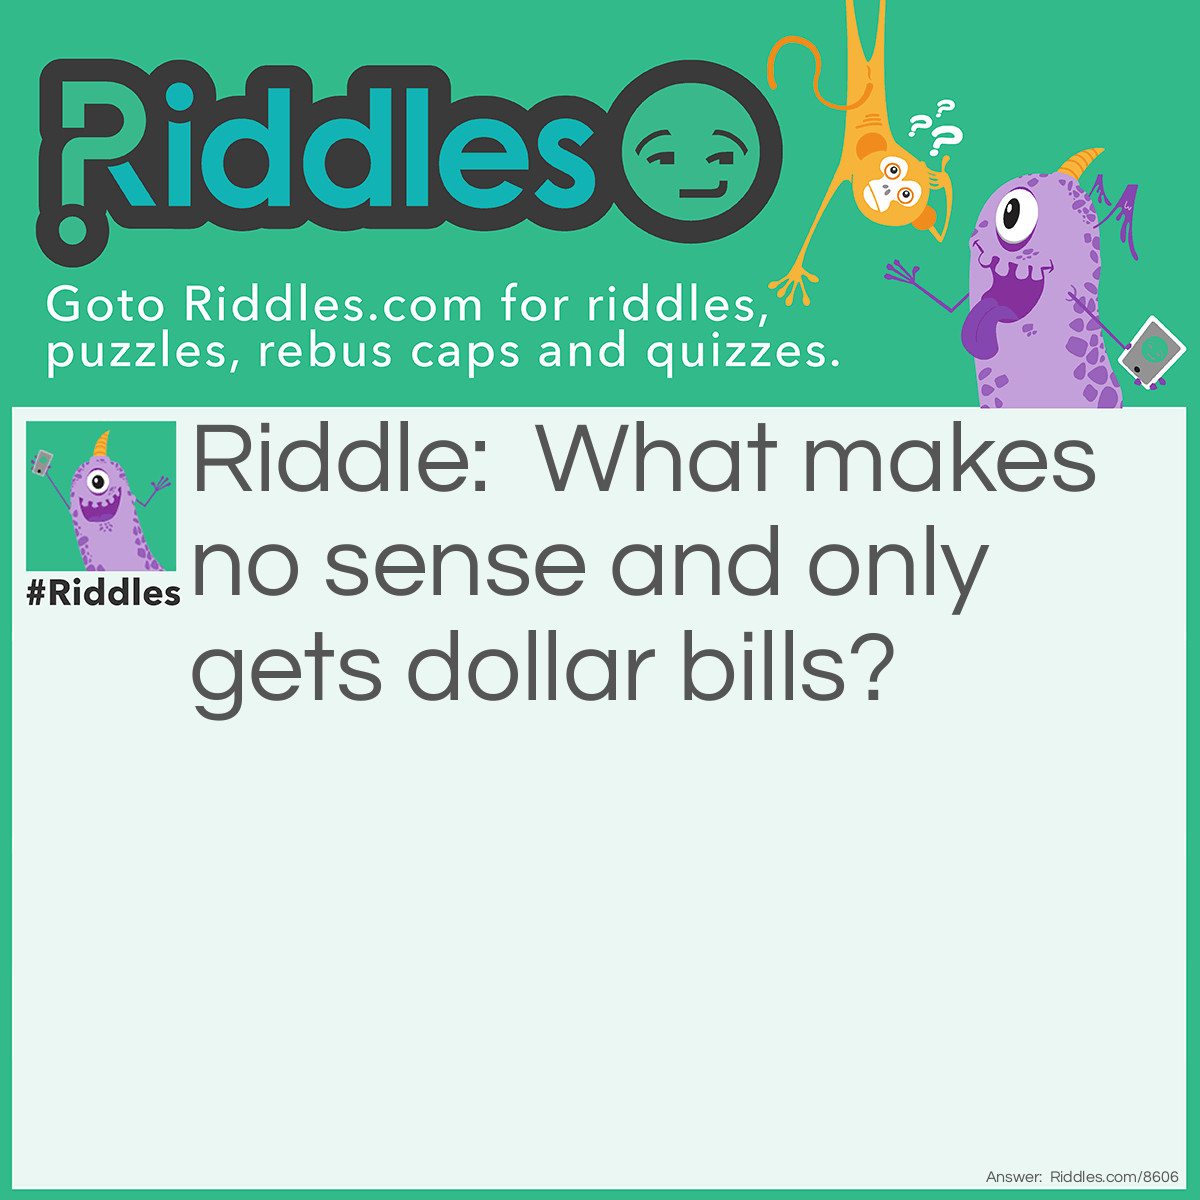 Riddle: What makes no sense and only gets dollar bills? Answer: Well, it gets no CENTS and it gets dollar bills, so I'm thinking it's somebody playing Monopoly!